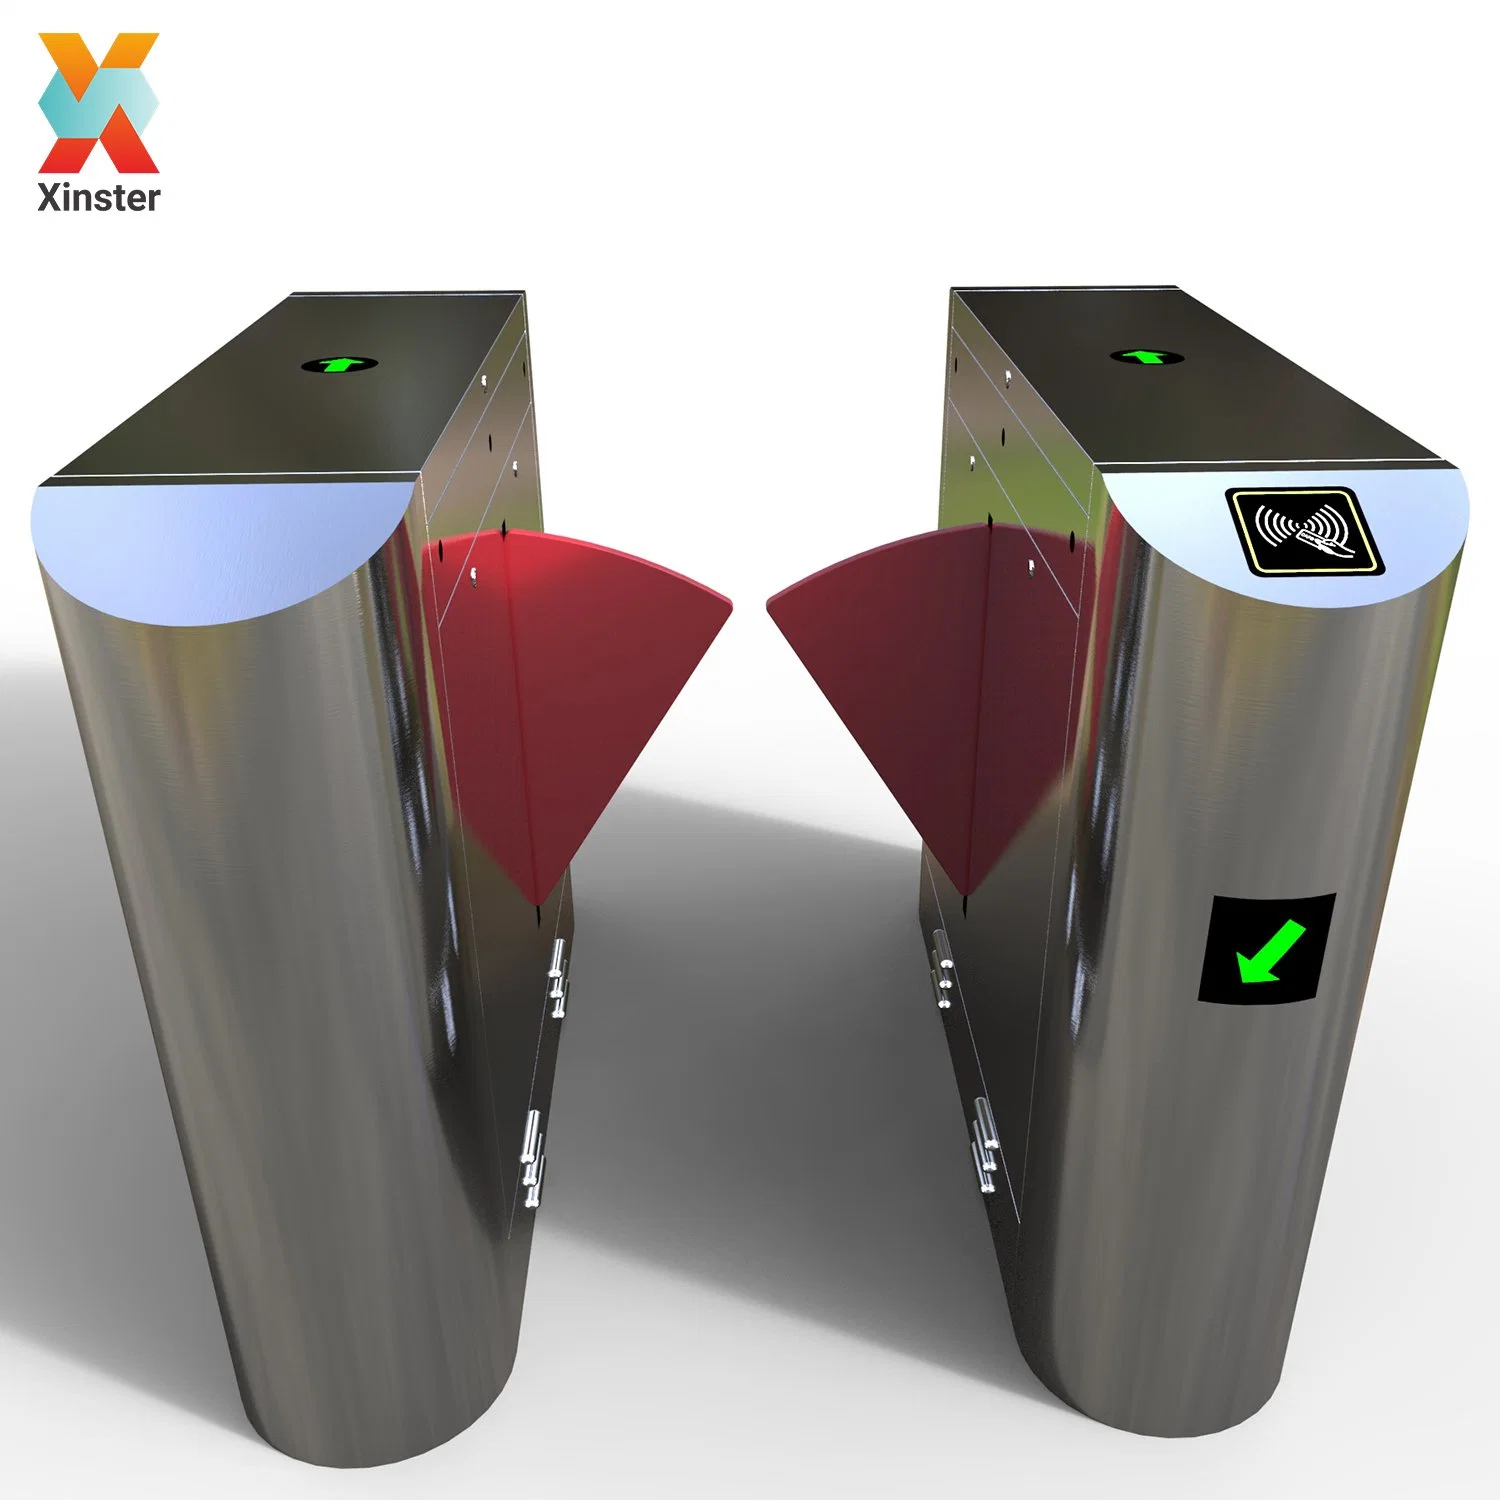 RFID Card Reader or Face Recognition Security Automatic Access Control System Turnstile Gate Door